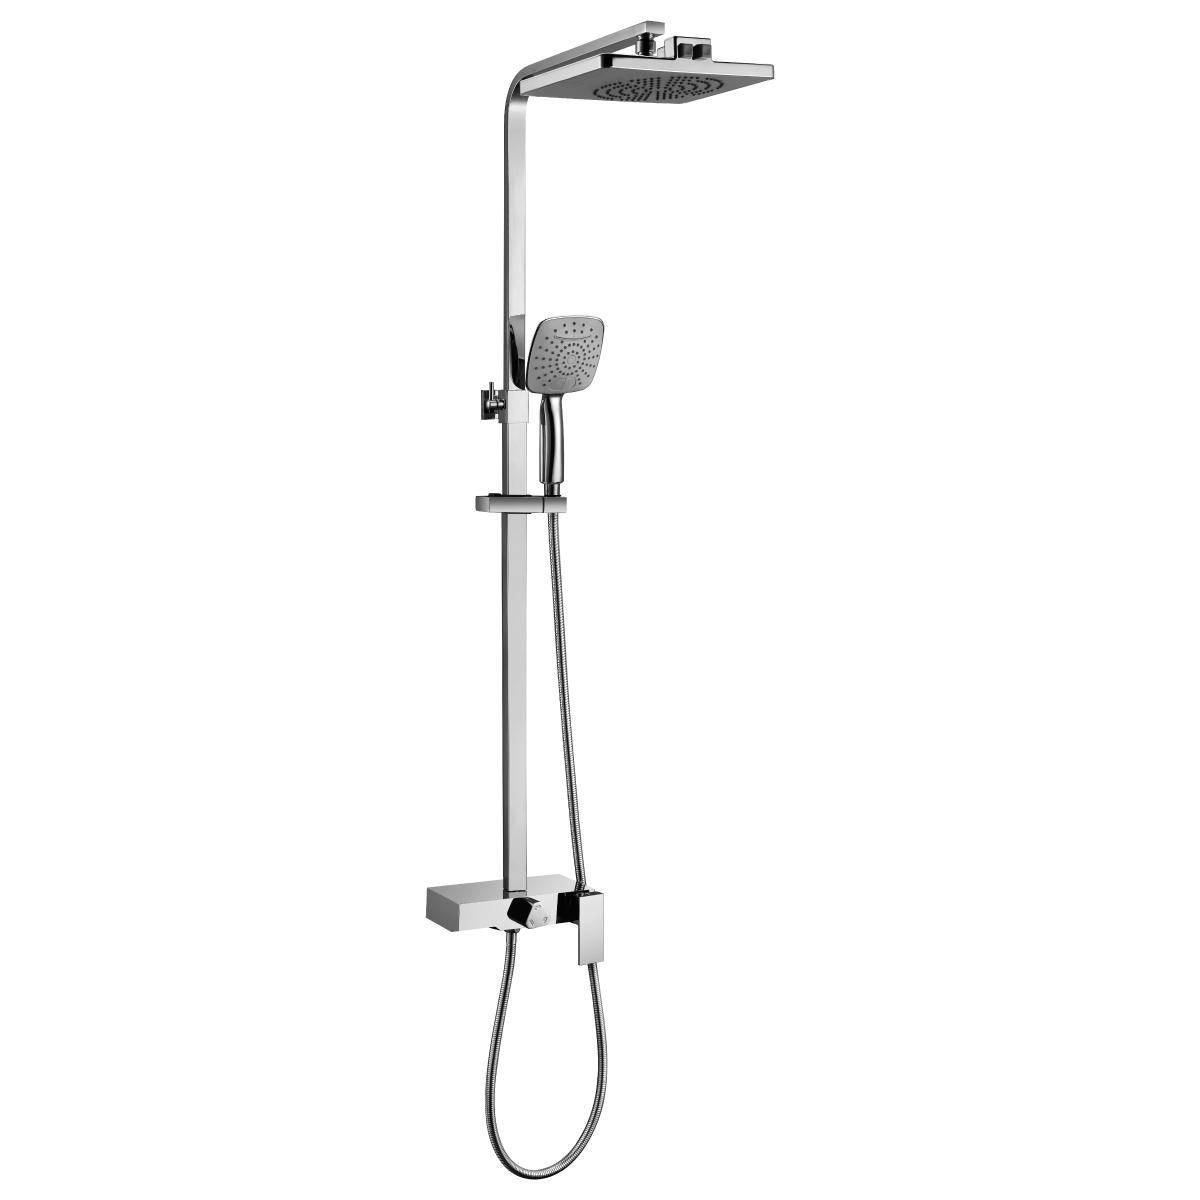 LM7005C Bath and shower faucet with adjustable rod height, waterfall spout and «Tropical rain» shower head